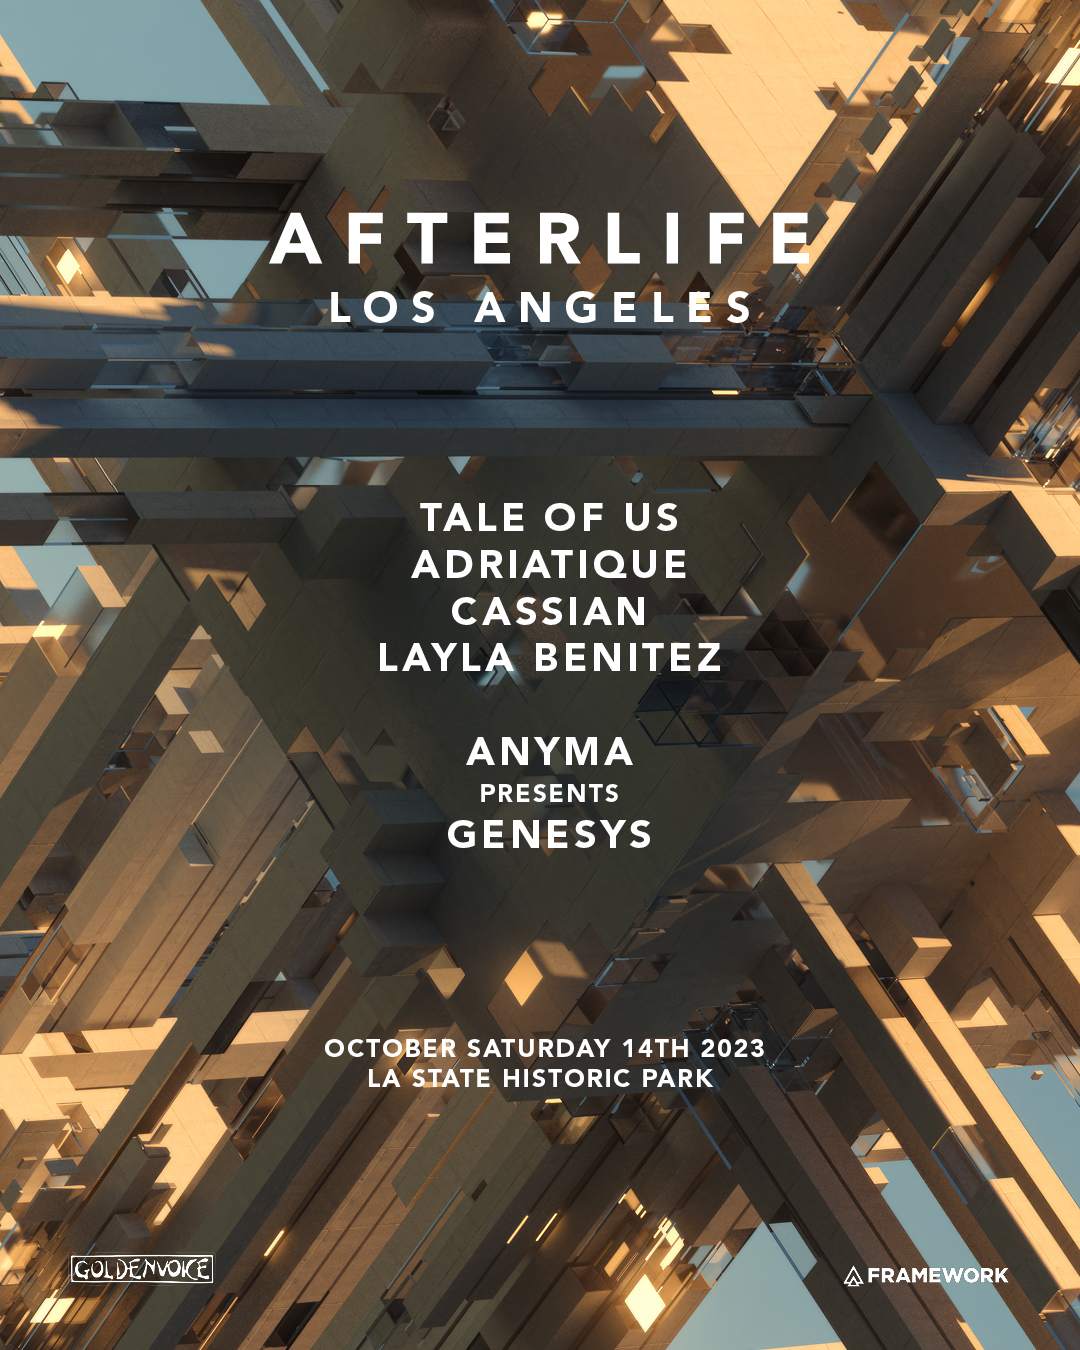 🚨 BREAKING - AFTERLIFE is finally coming to Los Angeles this Fall